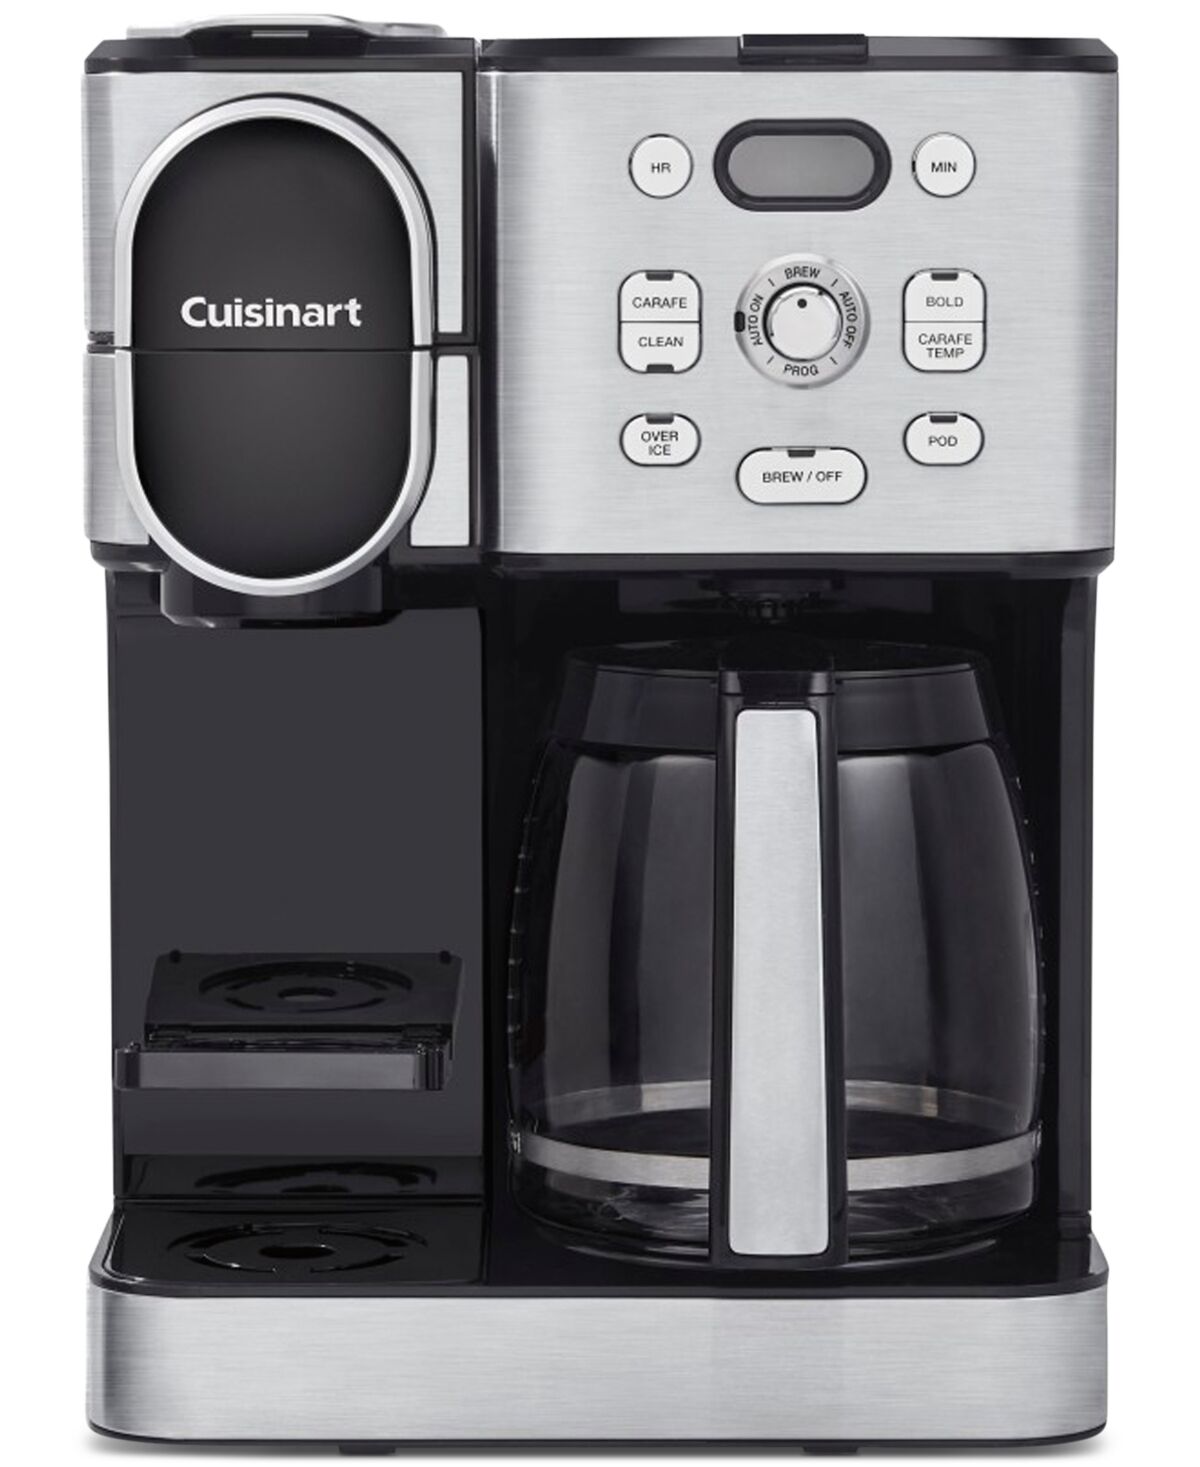 Cuisinart Ss-16 Coffee Center 2-in-1 12-Cup Drip Coffeemaker - Stainless